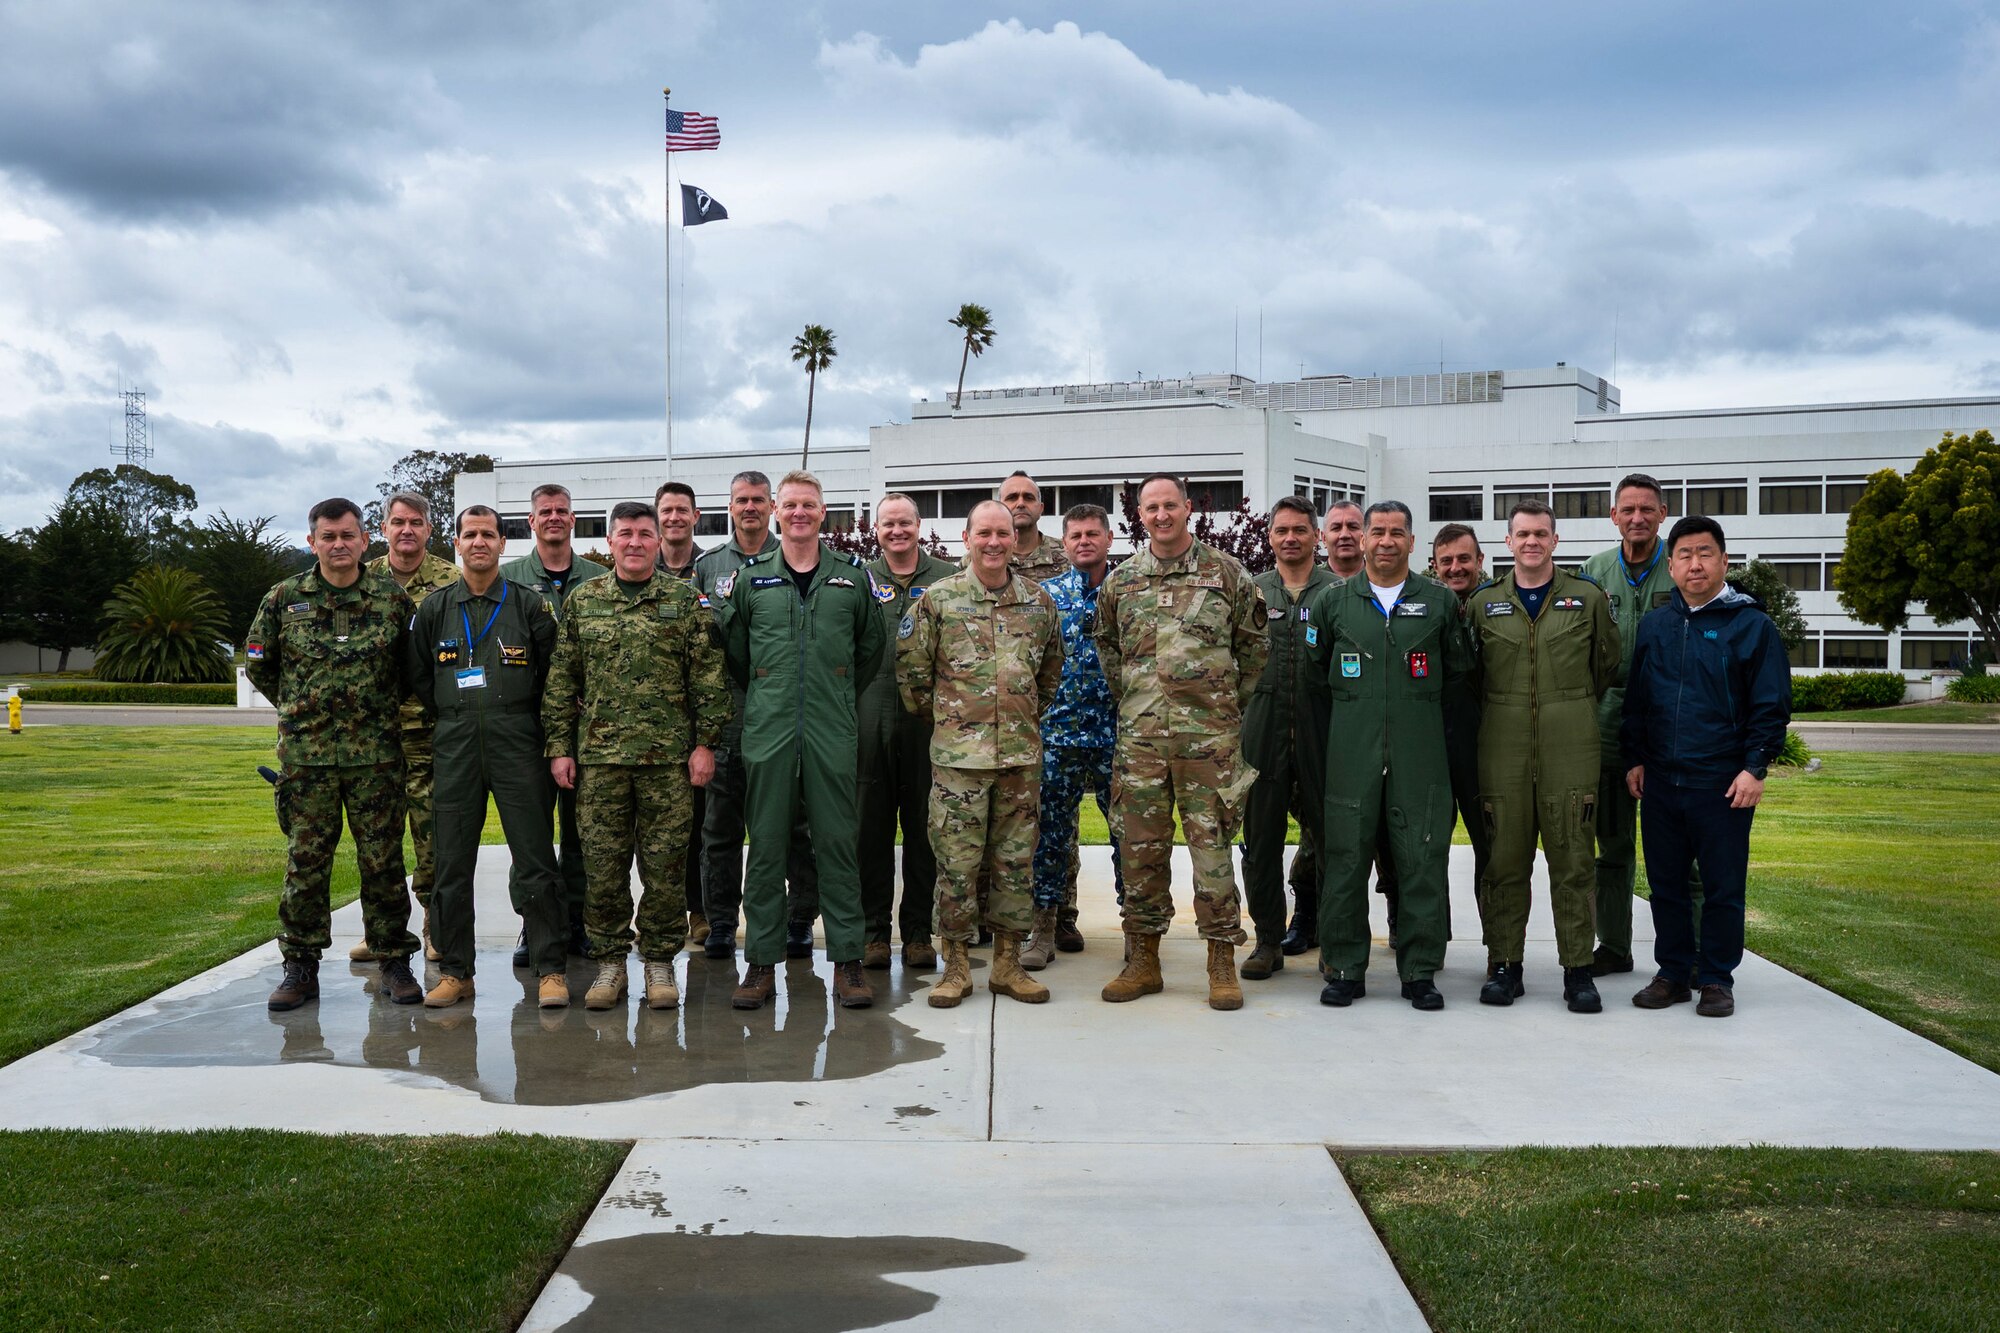 U.S. Space Force Maj. Gen. Douglas A. Schiess, Combined Force Space Component Command (CFSCC) commander, center, and U.S. Air Force Maj. Gen. Julian C. Cheater, Assistant Deputy Under Secretary of the Air Force International Affairs (SAF/IA), center right, stand for a group photo with participants of a SAF/IA-sponsored tour at Vandenberg Space Force Base, Calif., May 3, 2023. This DoD-level program aims to orient Attachés to DoD organizations and provide strategic messaging to senior foreign leaders, and is executed on behalf of the USAF Chief of Staff Gen. Charles Q. Brown. (U.S. Space Force photo by Tech. Sgt. Luke Kitterman)